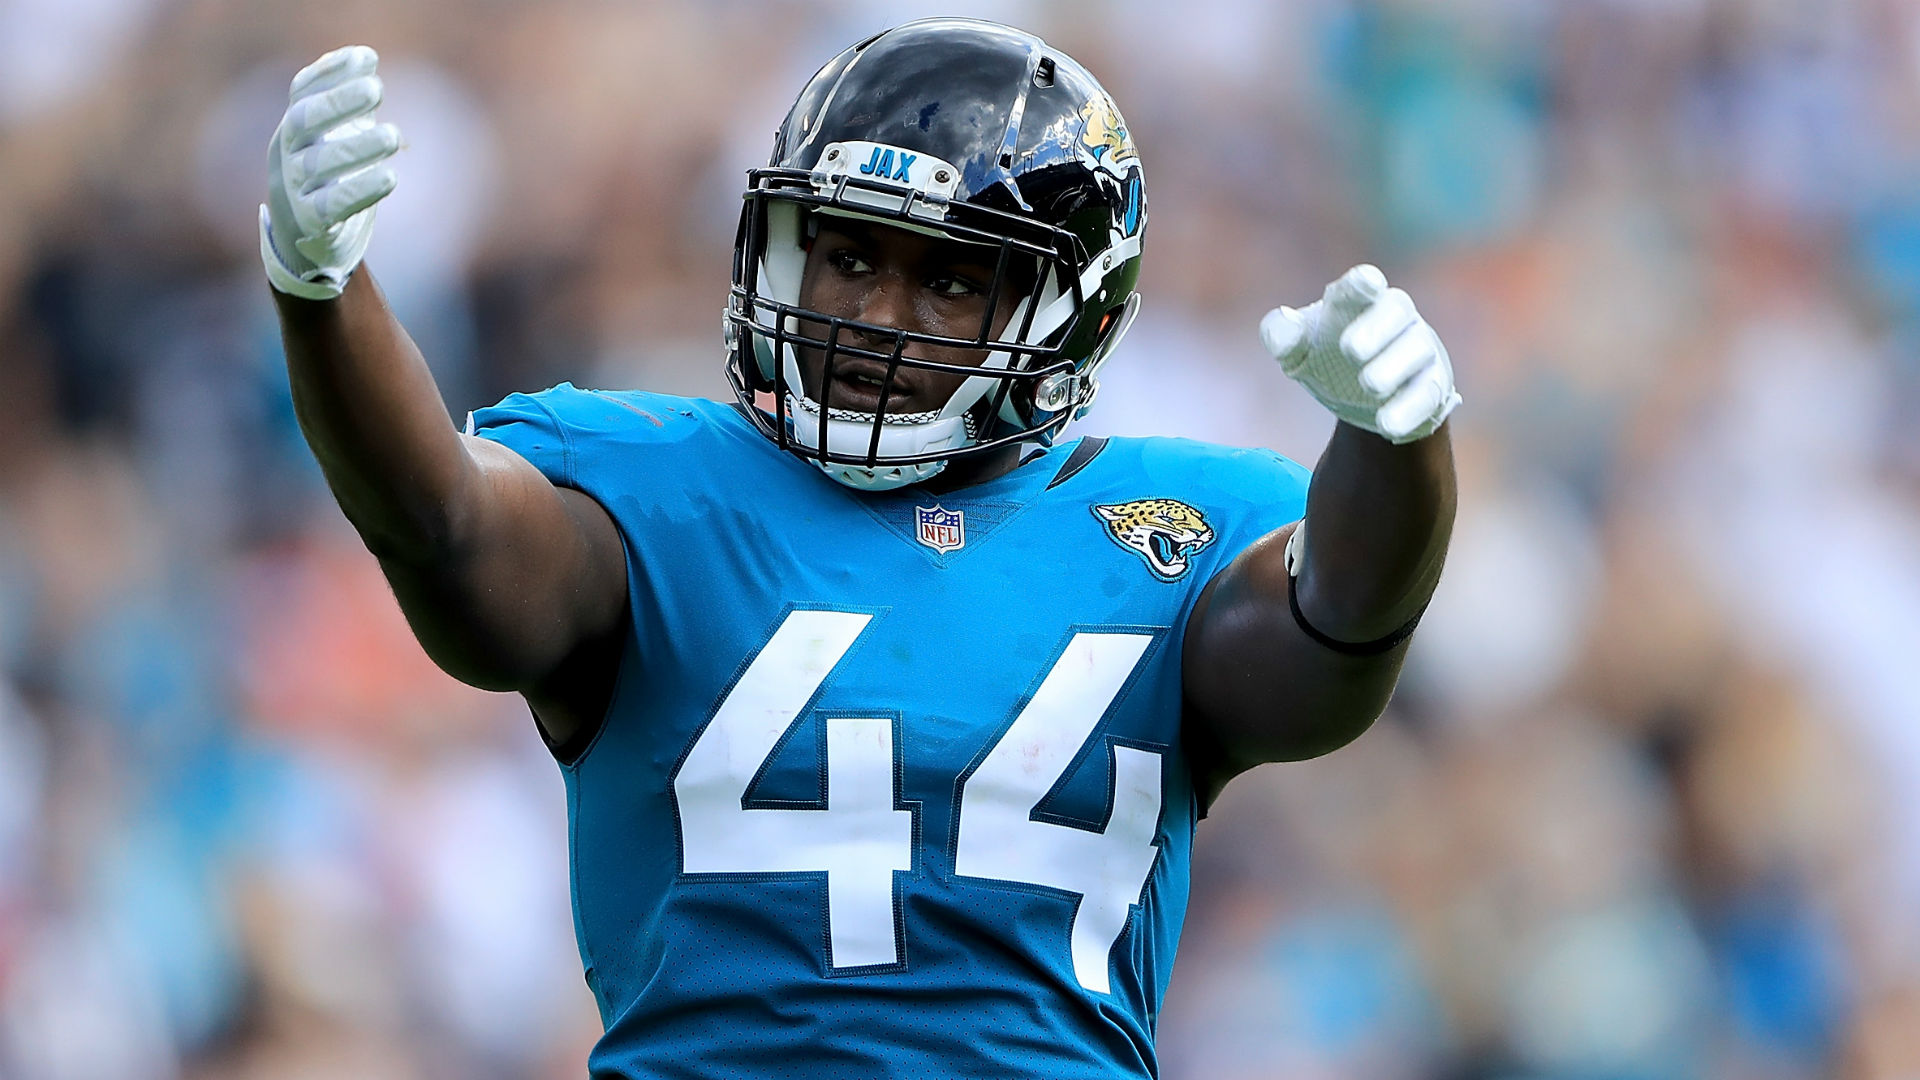 Best defensive players in nfl 2020